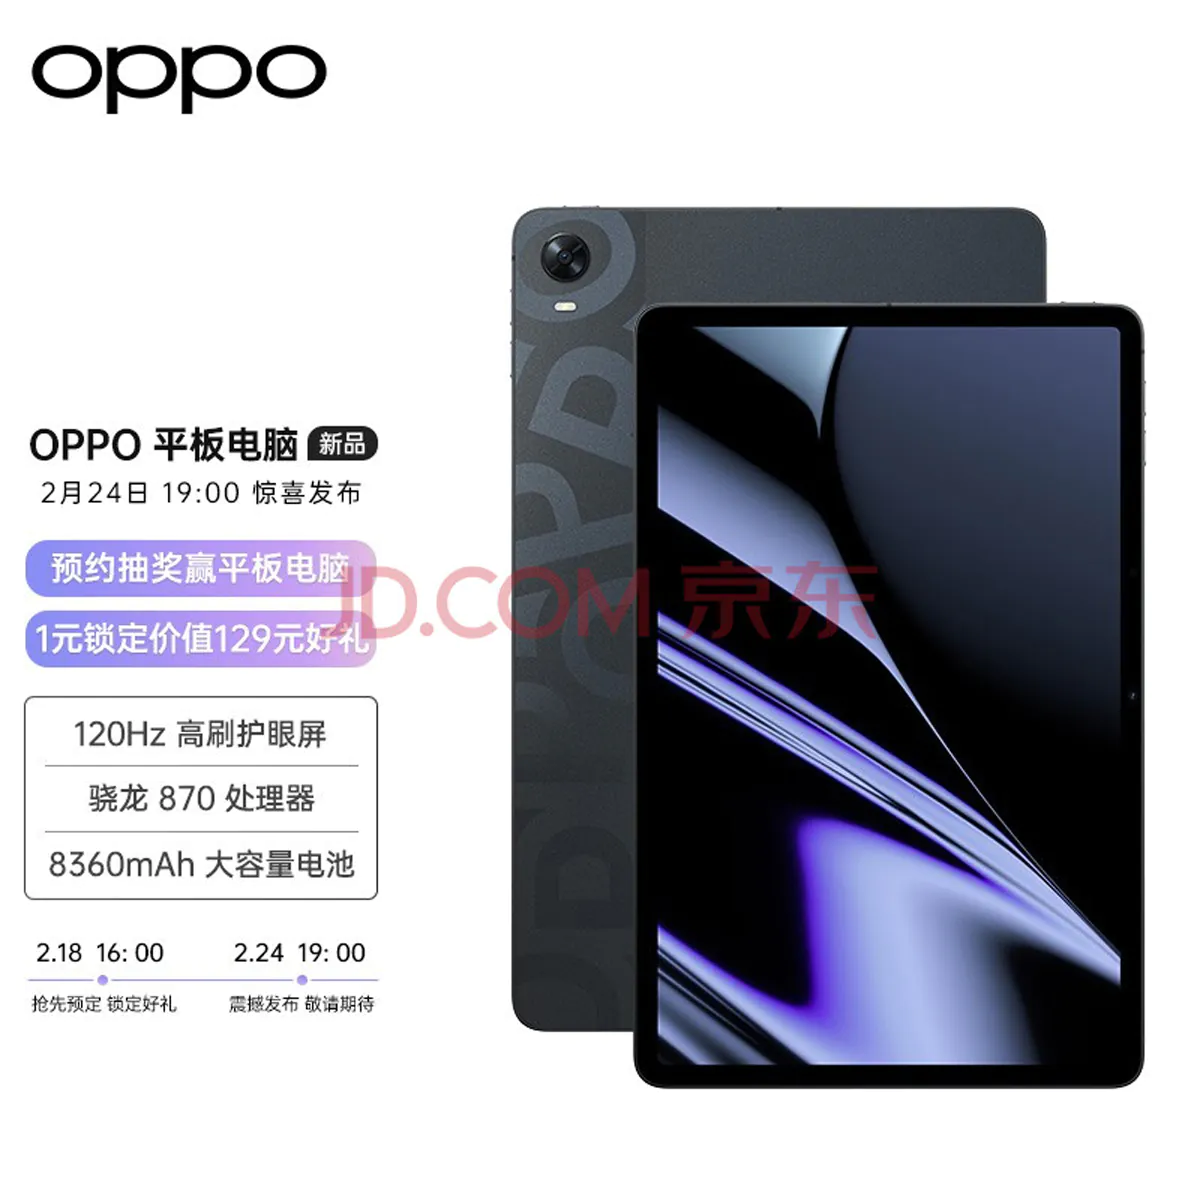 OPPO Pad officially unveiled